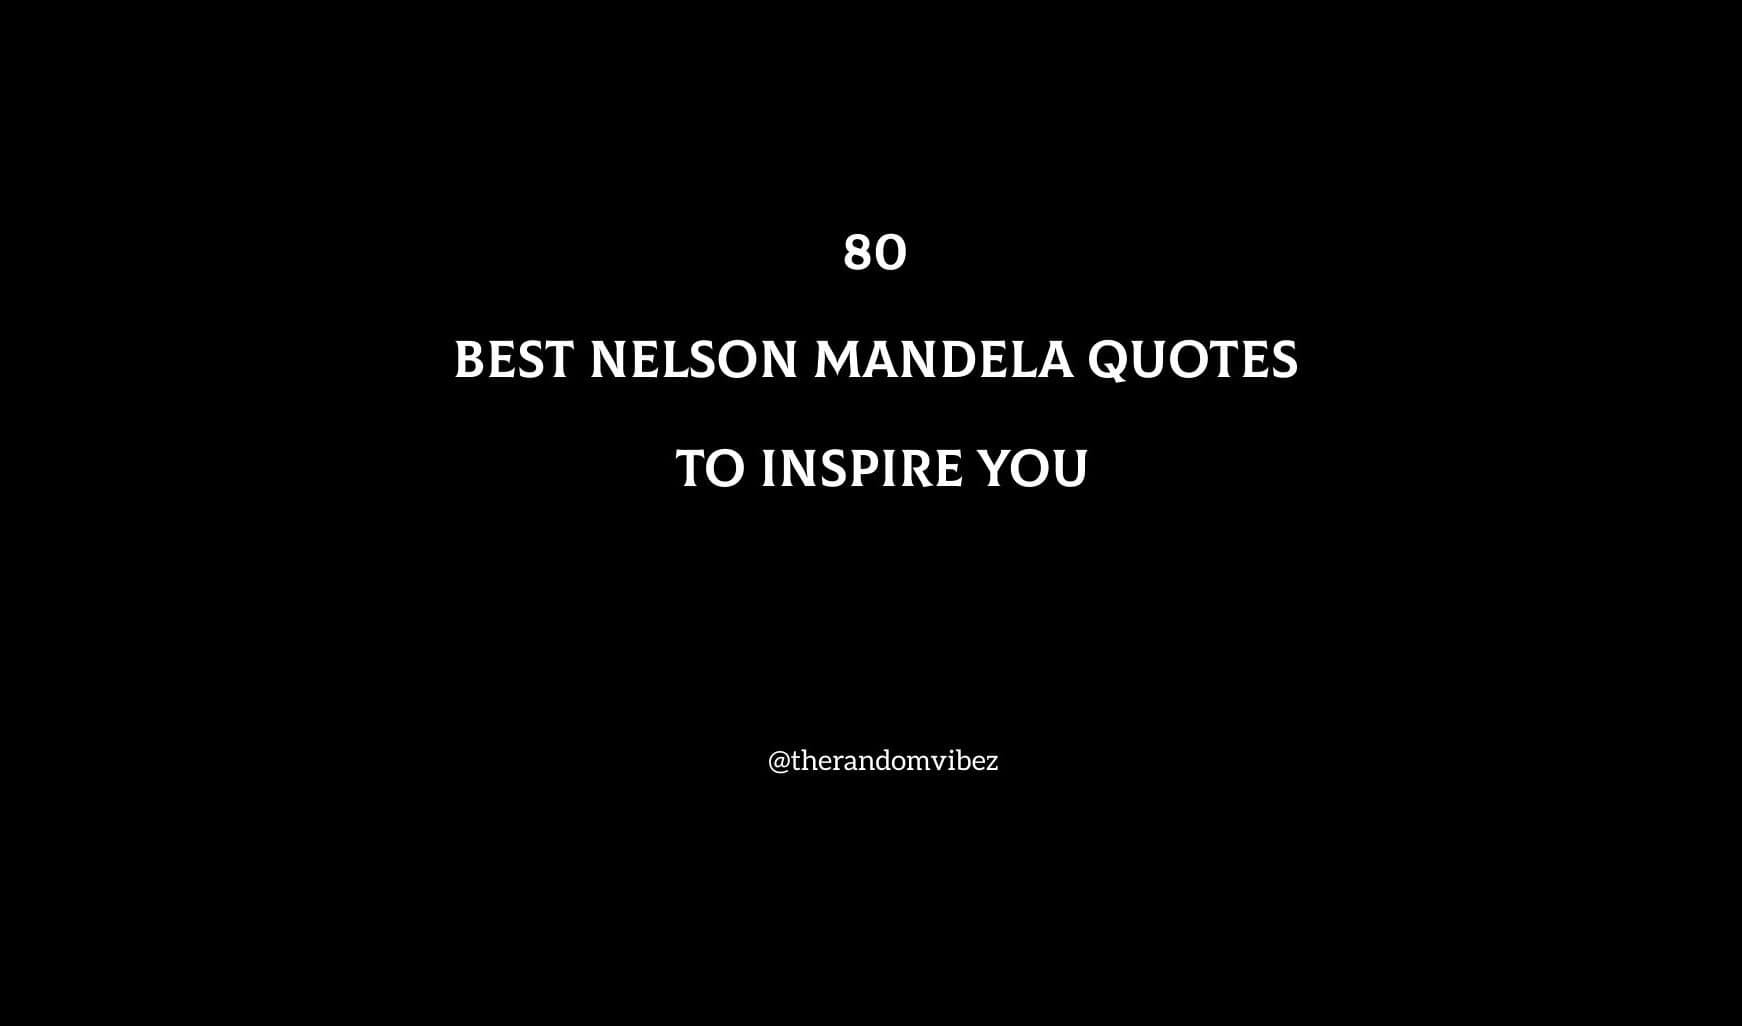 80 Best Nelson Mandela Quotes To Inspire You